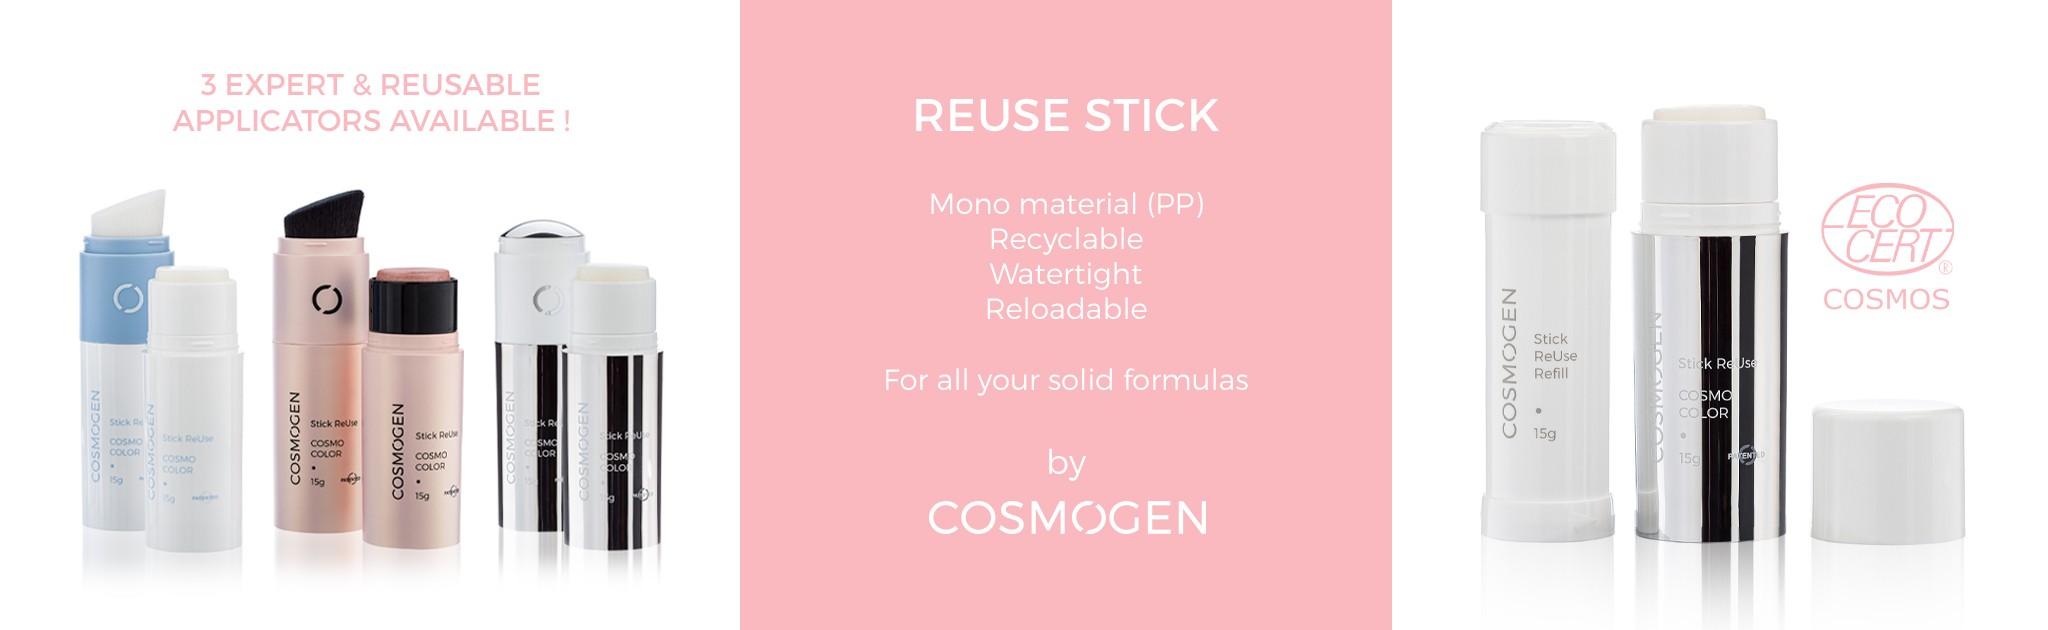 https://www.cosmogen.fr/re-use-stick-care.html?search_query=stick&results=5